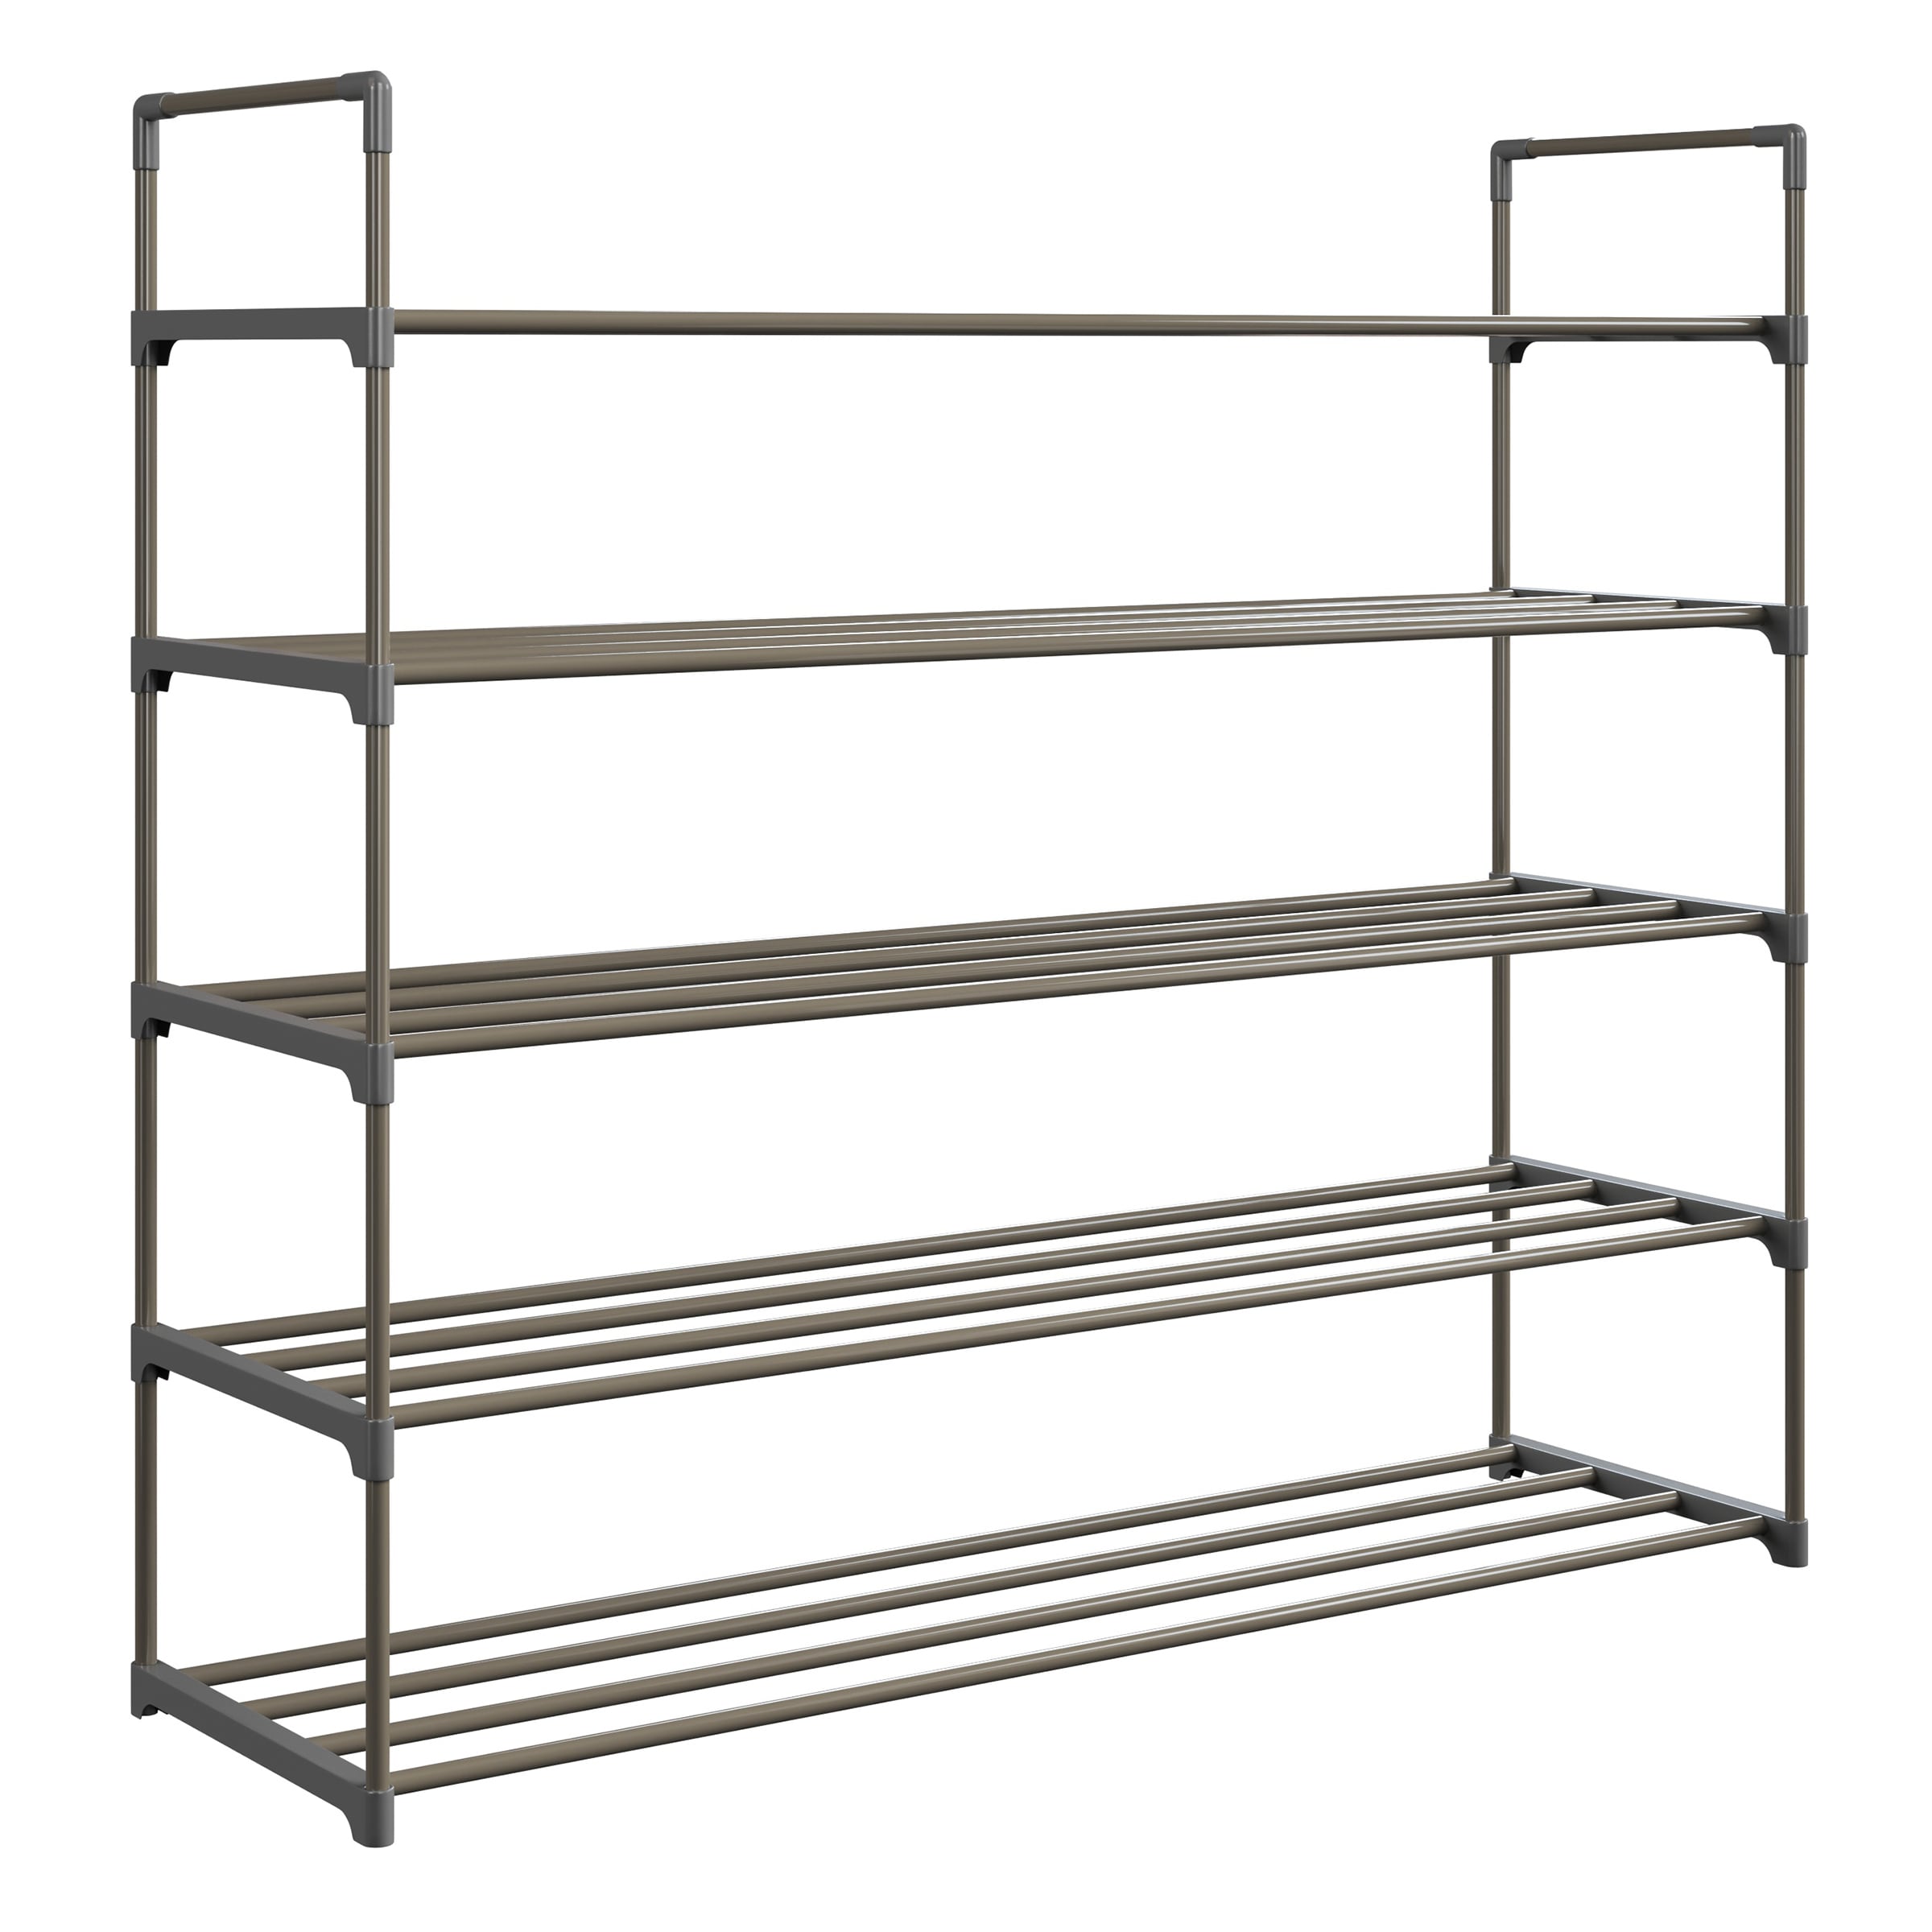 Hastings Home 5-Tier Shoe Rack for Storage and Organization - Black